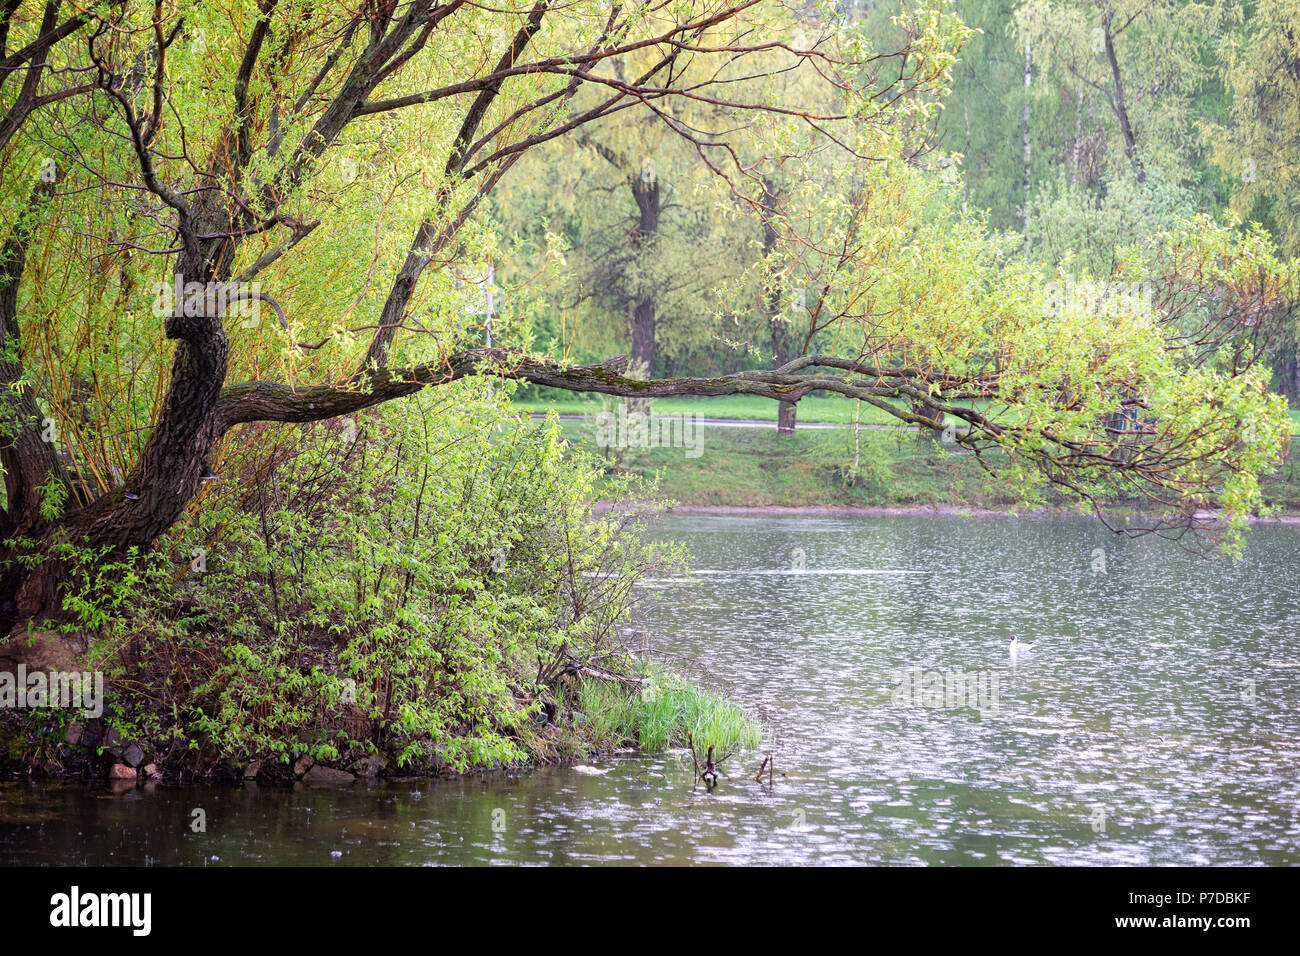 Spring rain over the park pond, green willow tree, fresh leaves, a bird in the water. Stock Photo